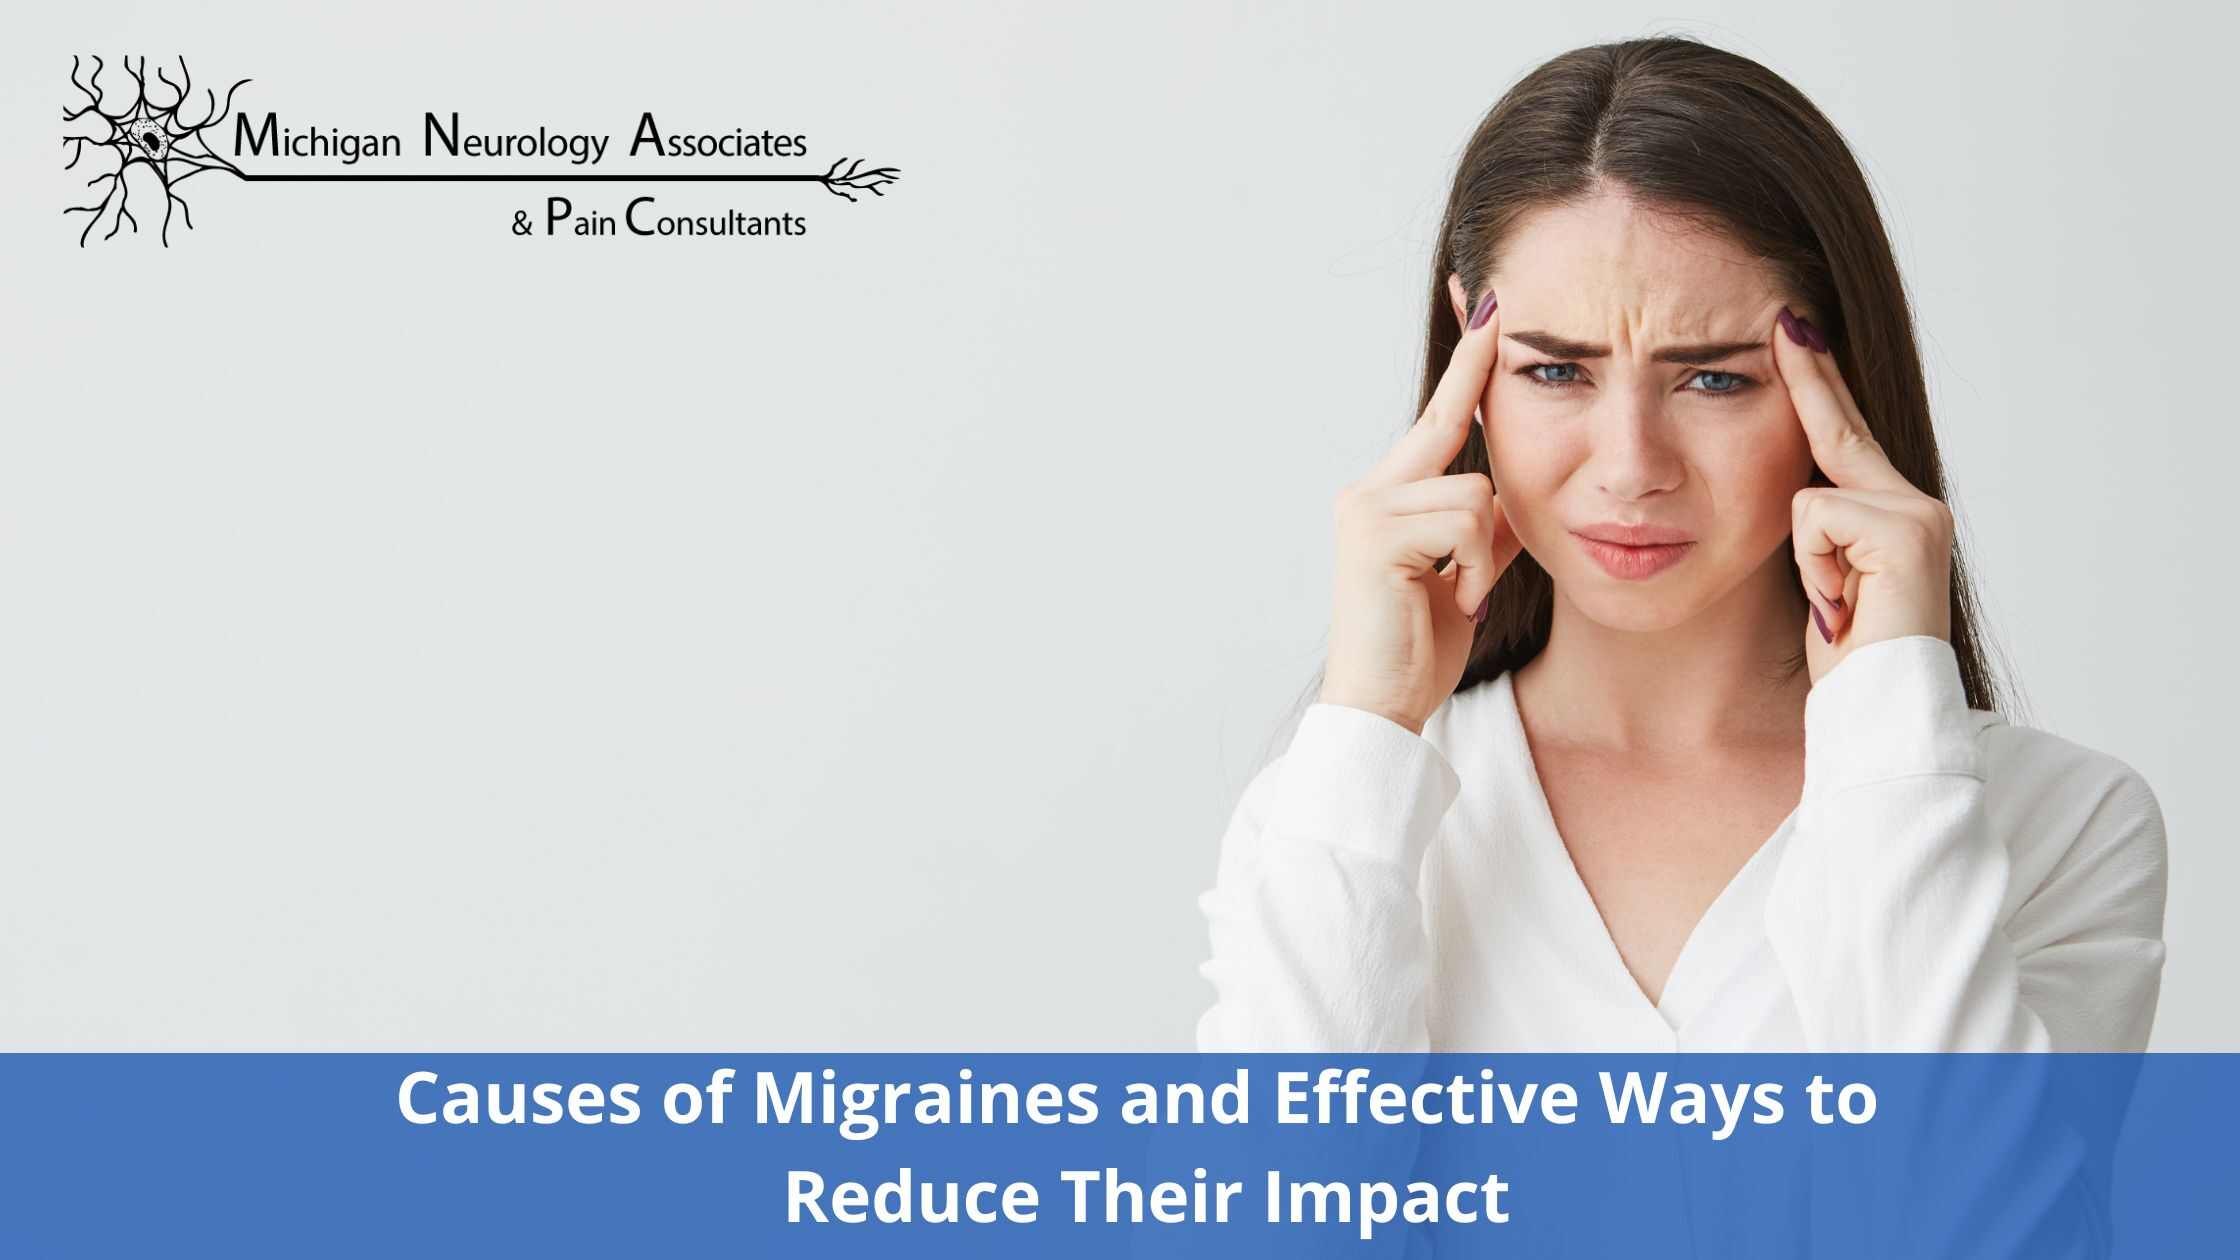 Causes of Migraines and Effective Ways to Reduce Their Impact